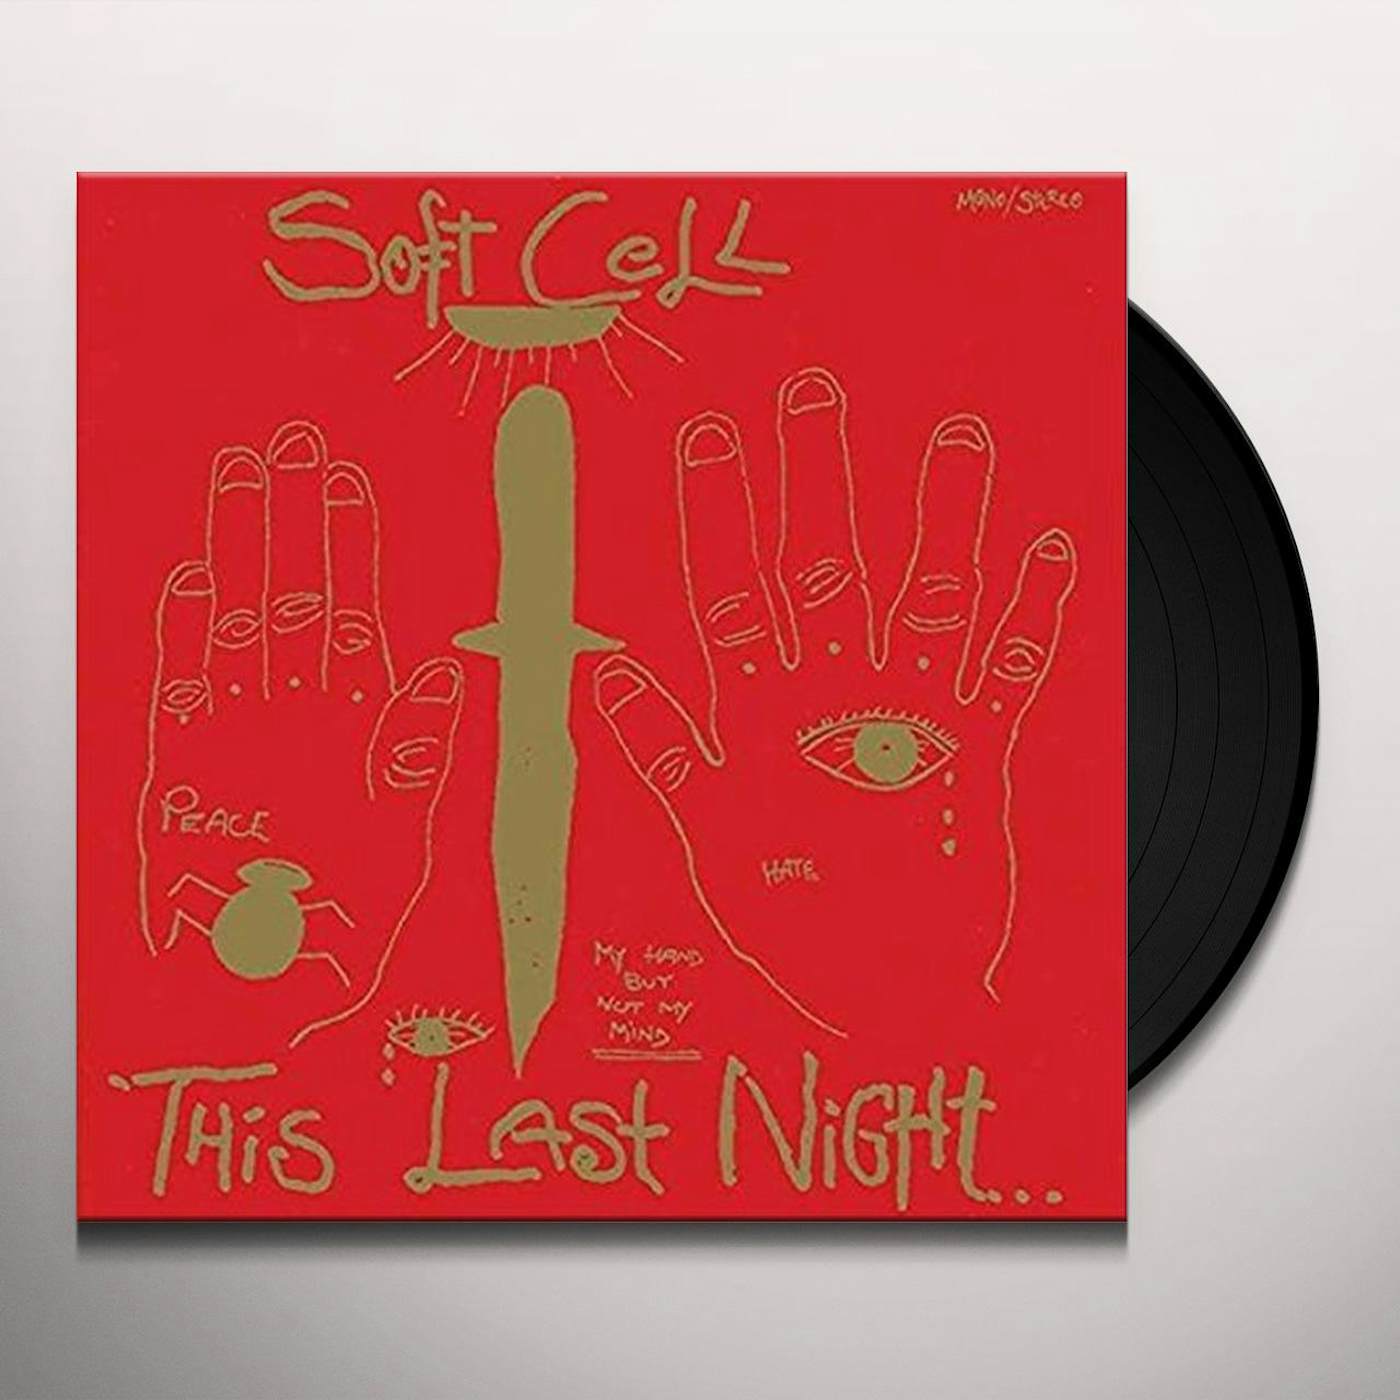 Soft Cell This Last Night In Sodom Vinyl Record